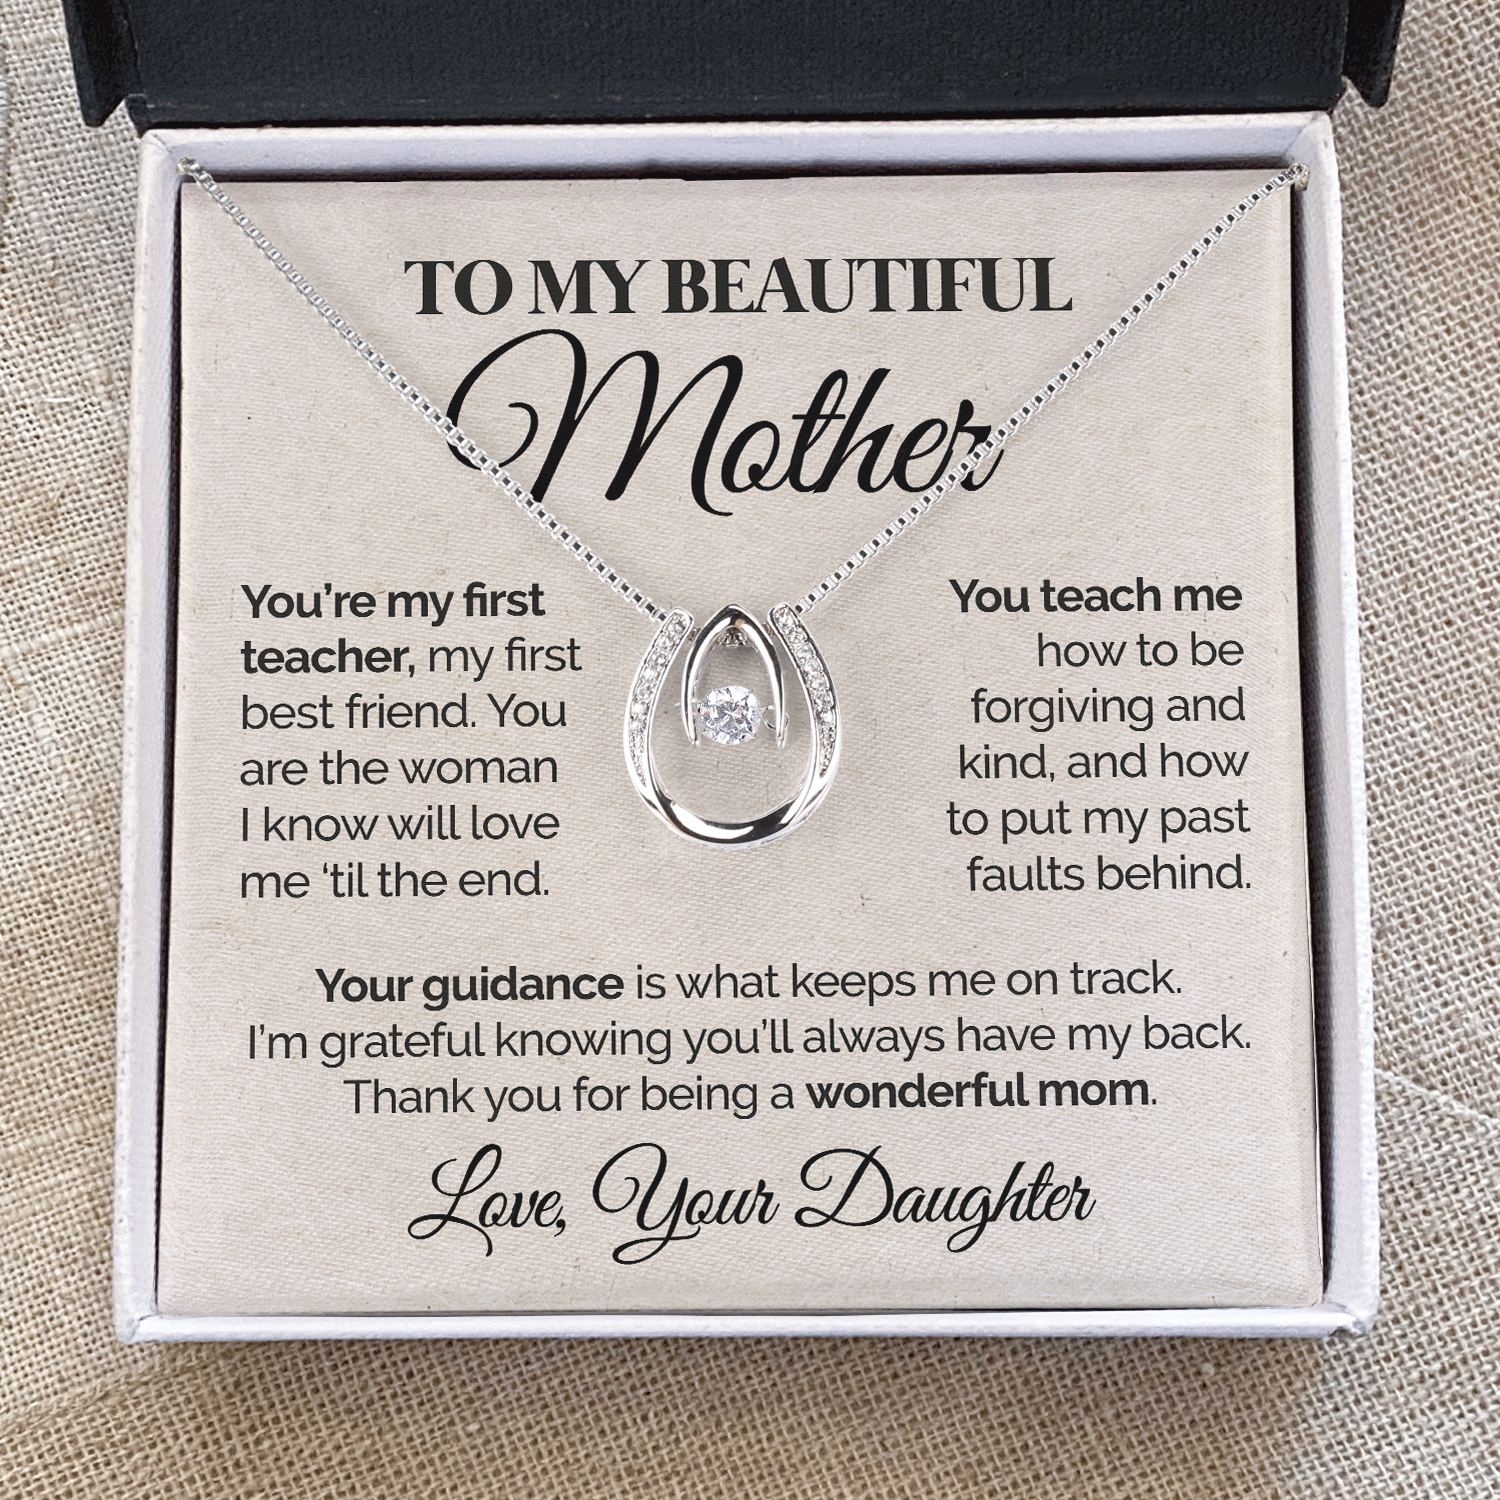 ShineOn Fulfillment Jewelry Standard Box To My Beautiful Mother - You're My First Teacher - Lucky In Love Necklace